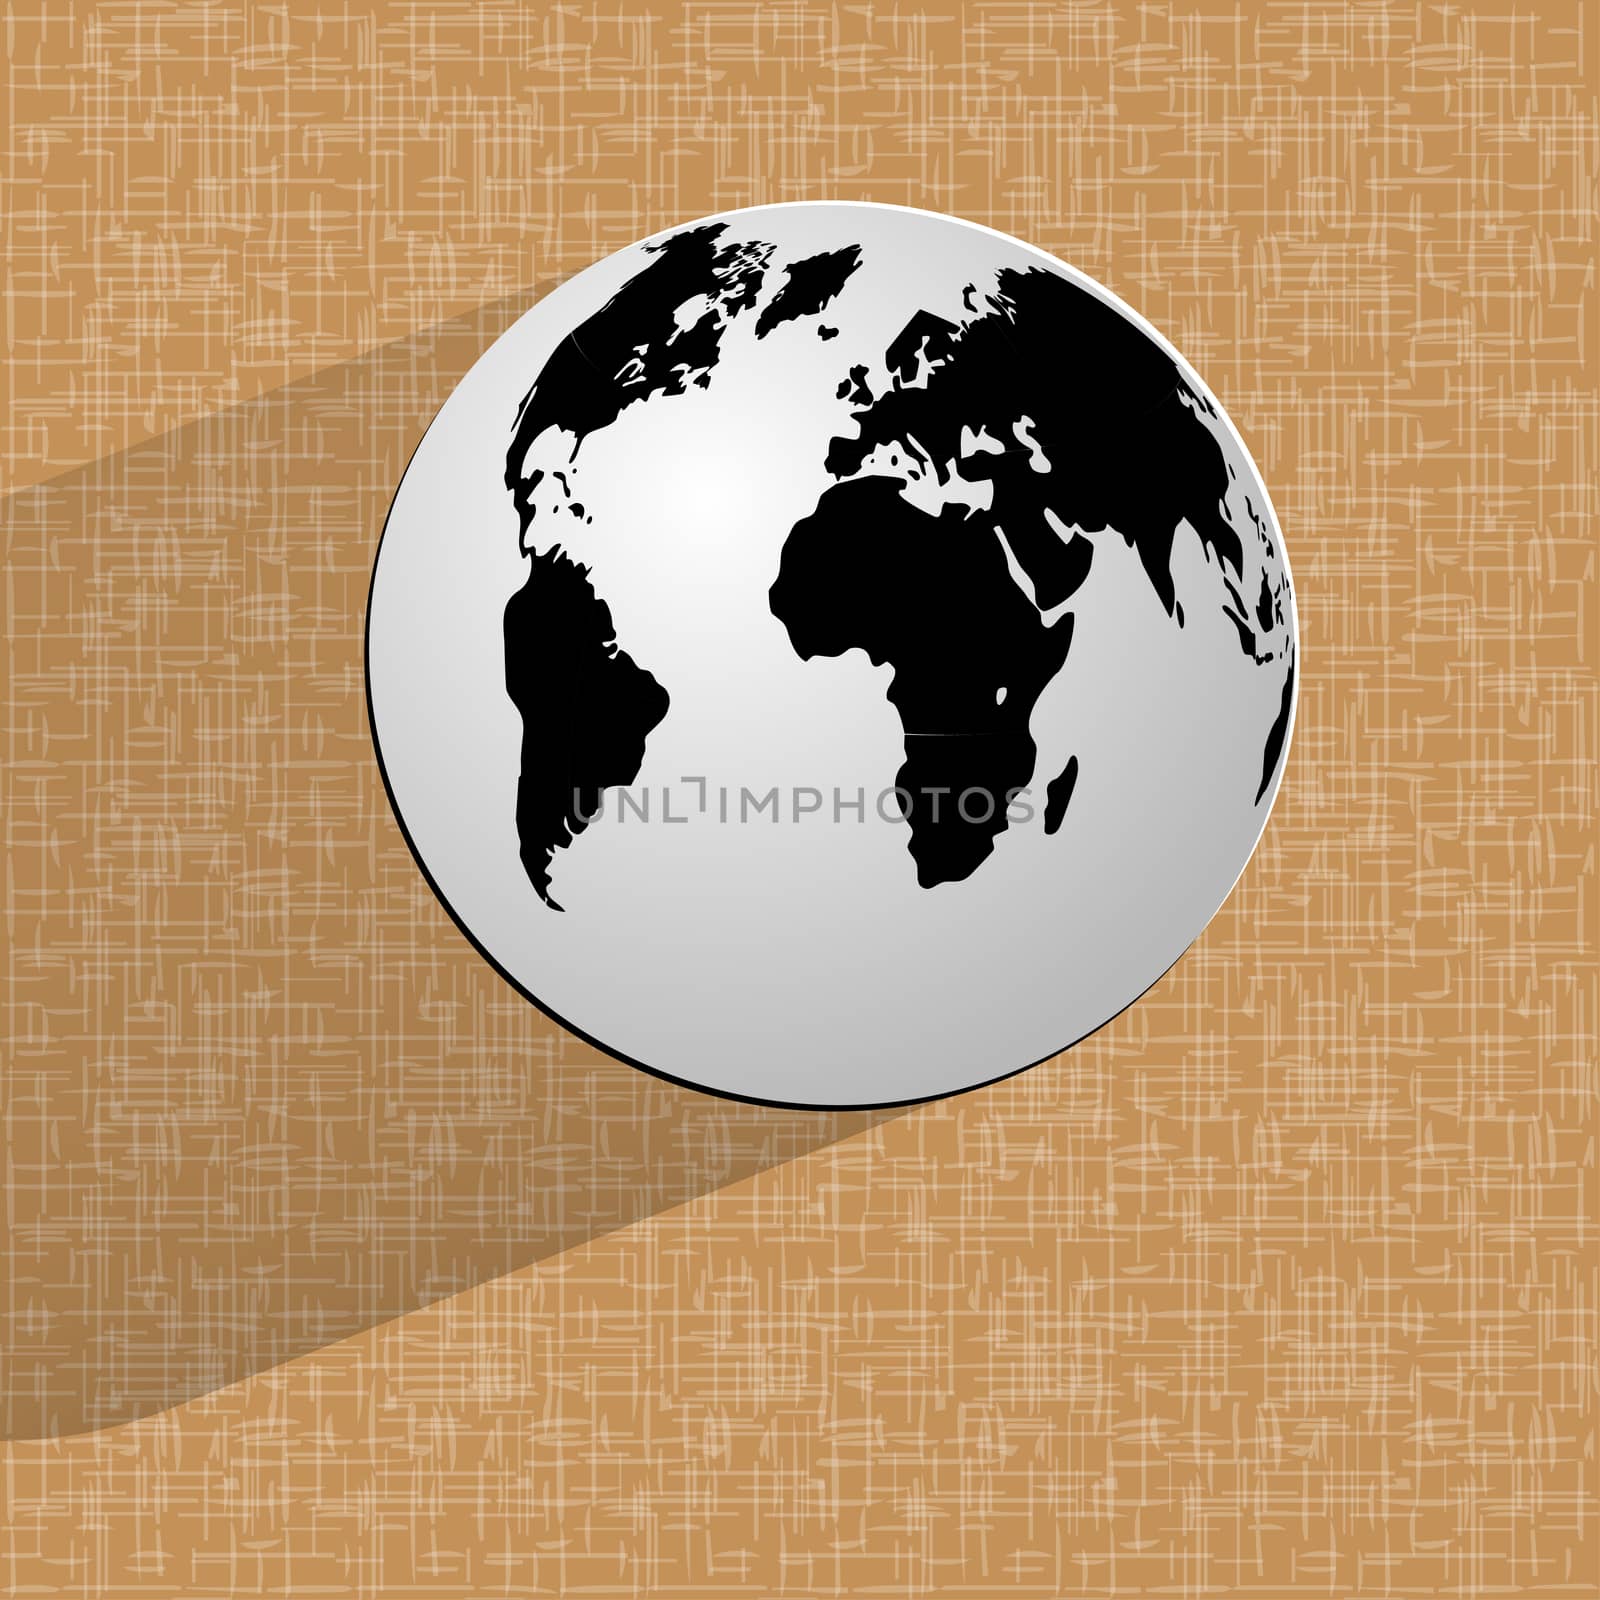 World map web icon on a flat geometric abstract background.  illustration. 